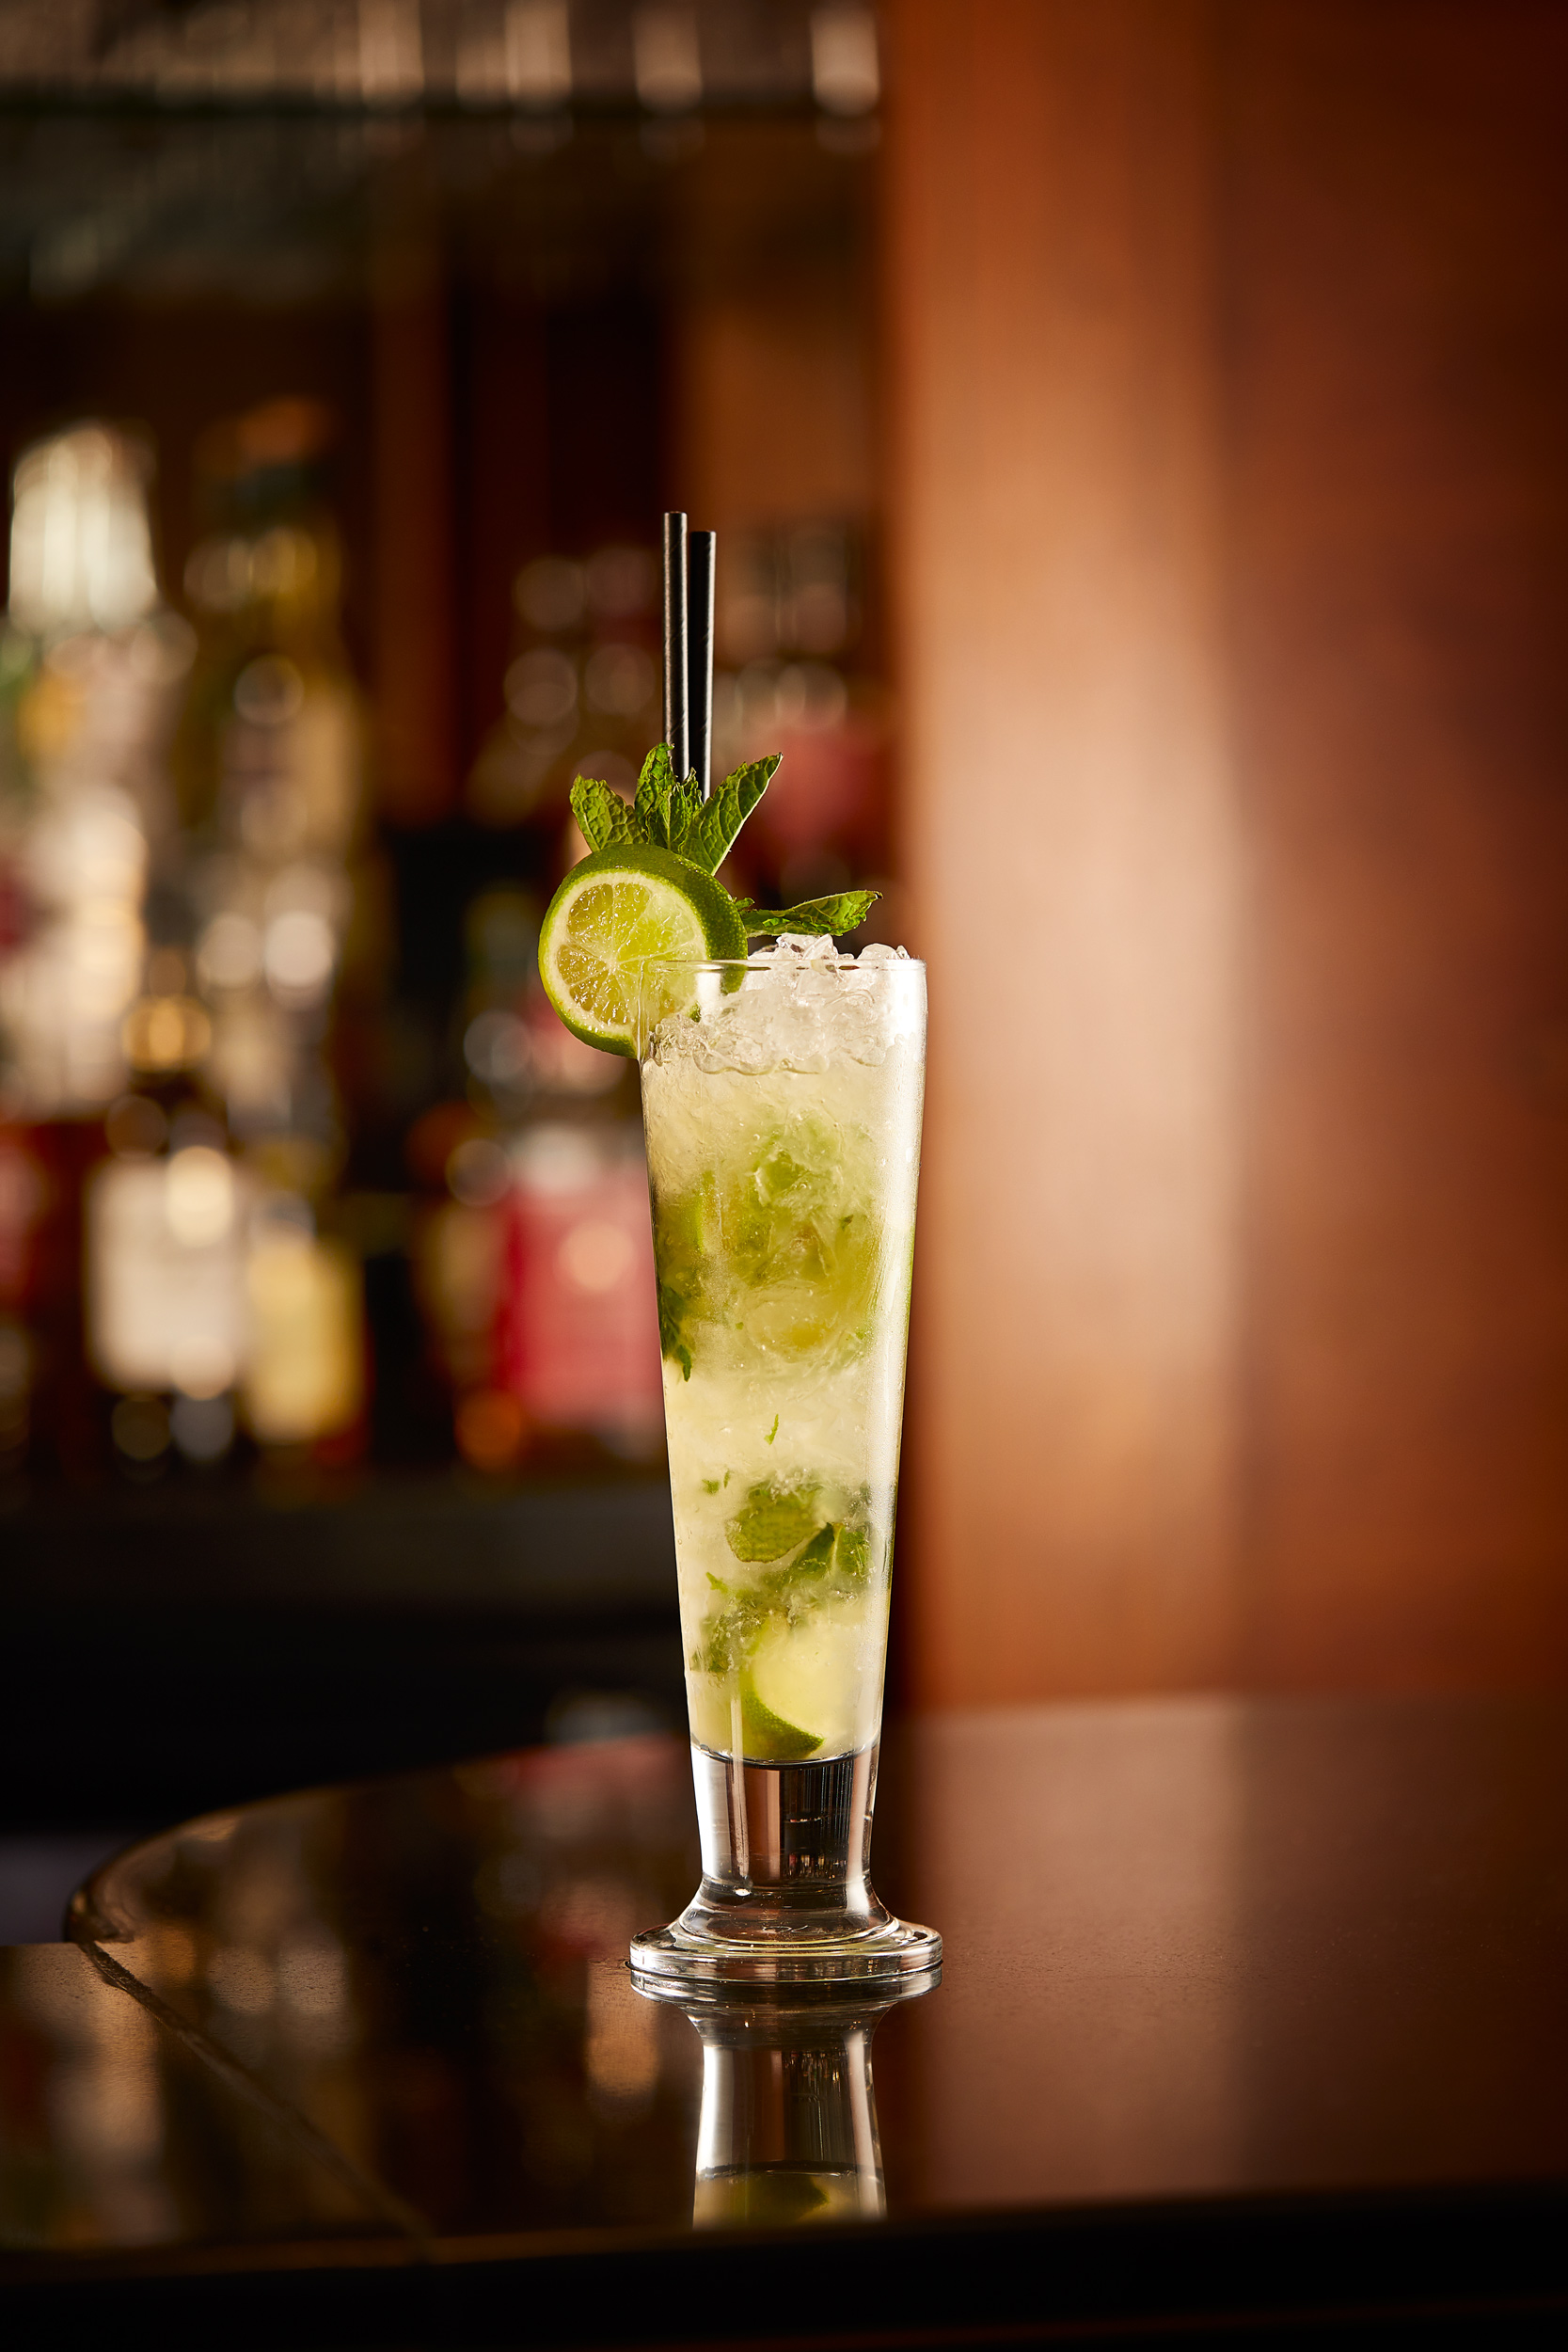 Mojito on the Bar at Bath Spa Hotel, food and drinks photographer Alastair Ferrier.